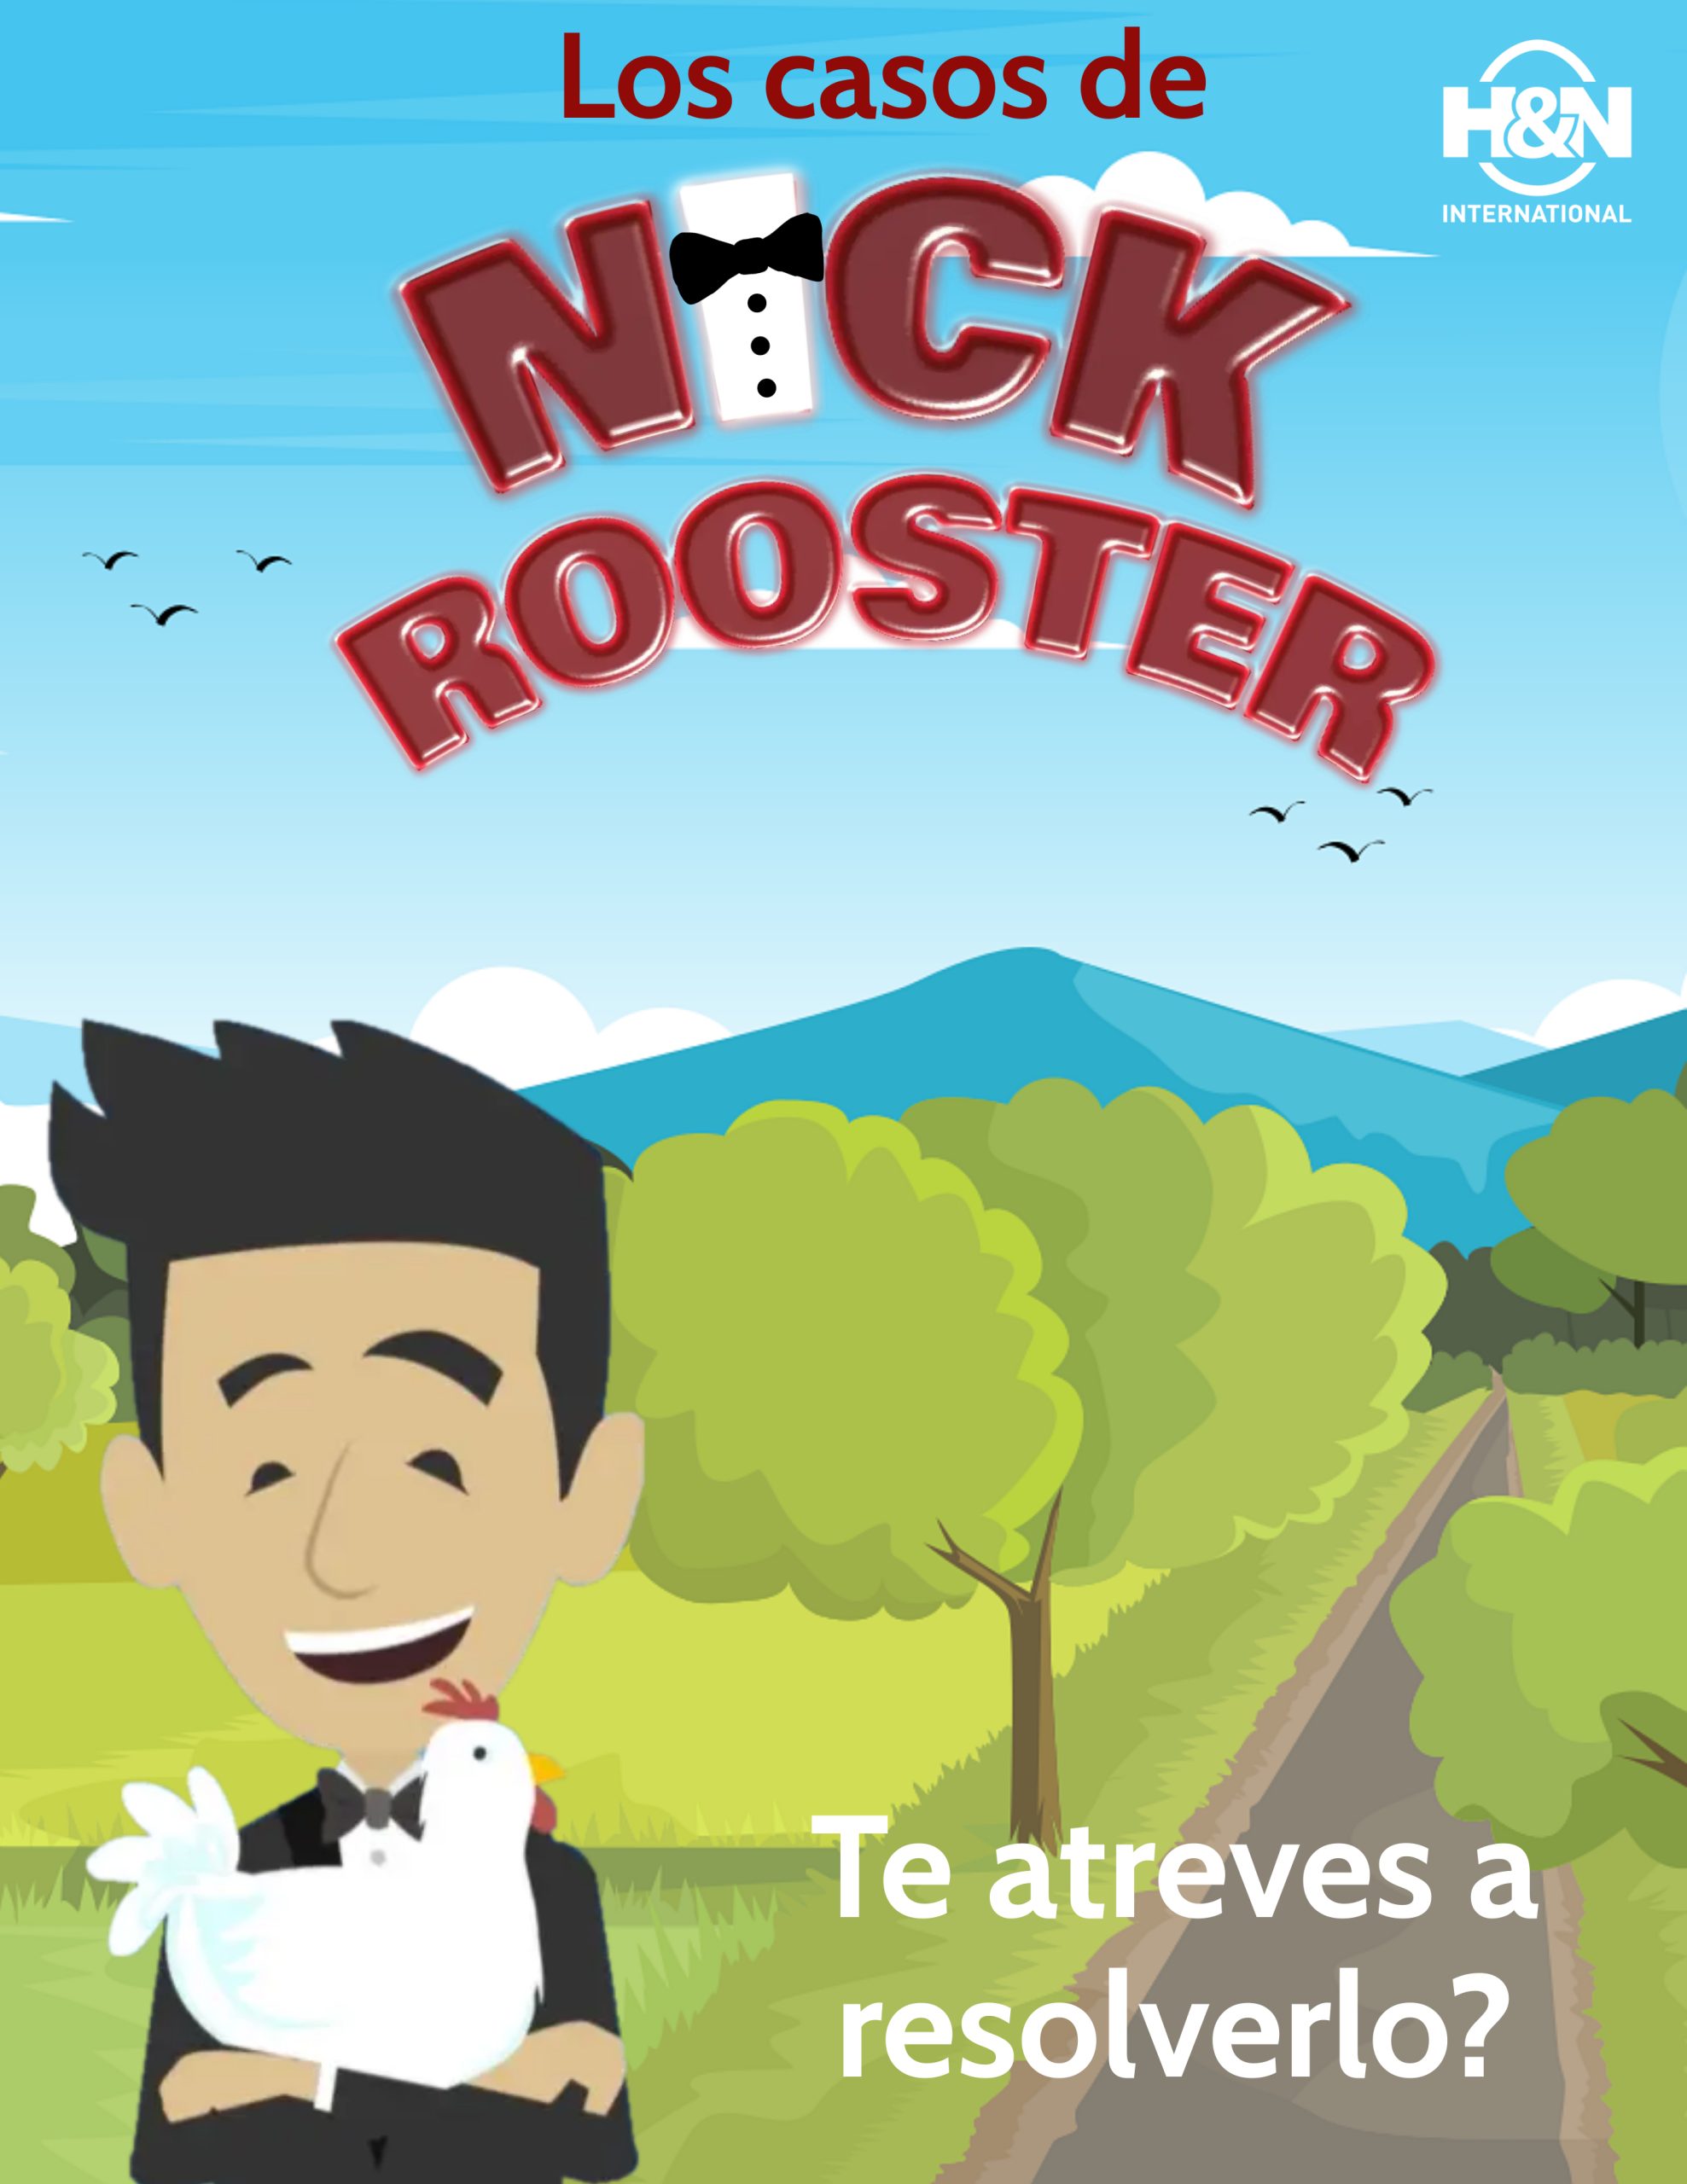 Nick Rooster caso num. 11